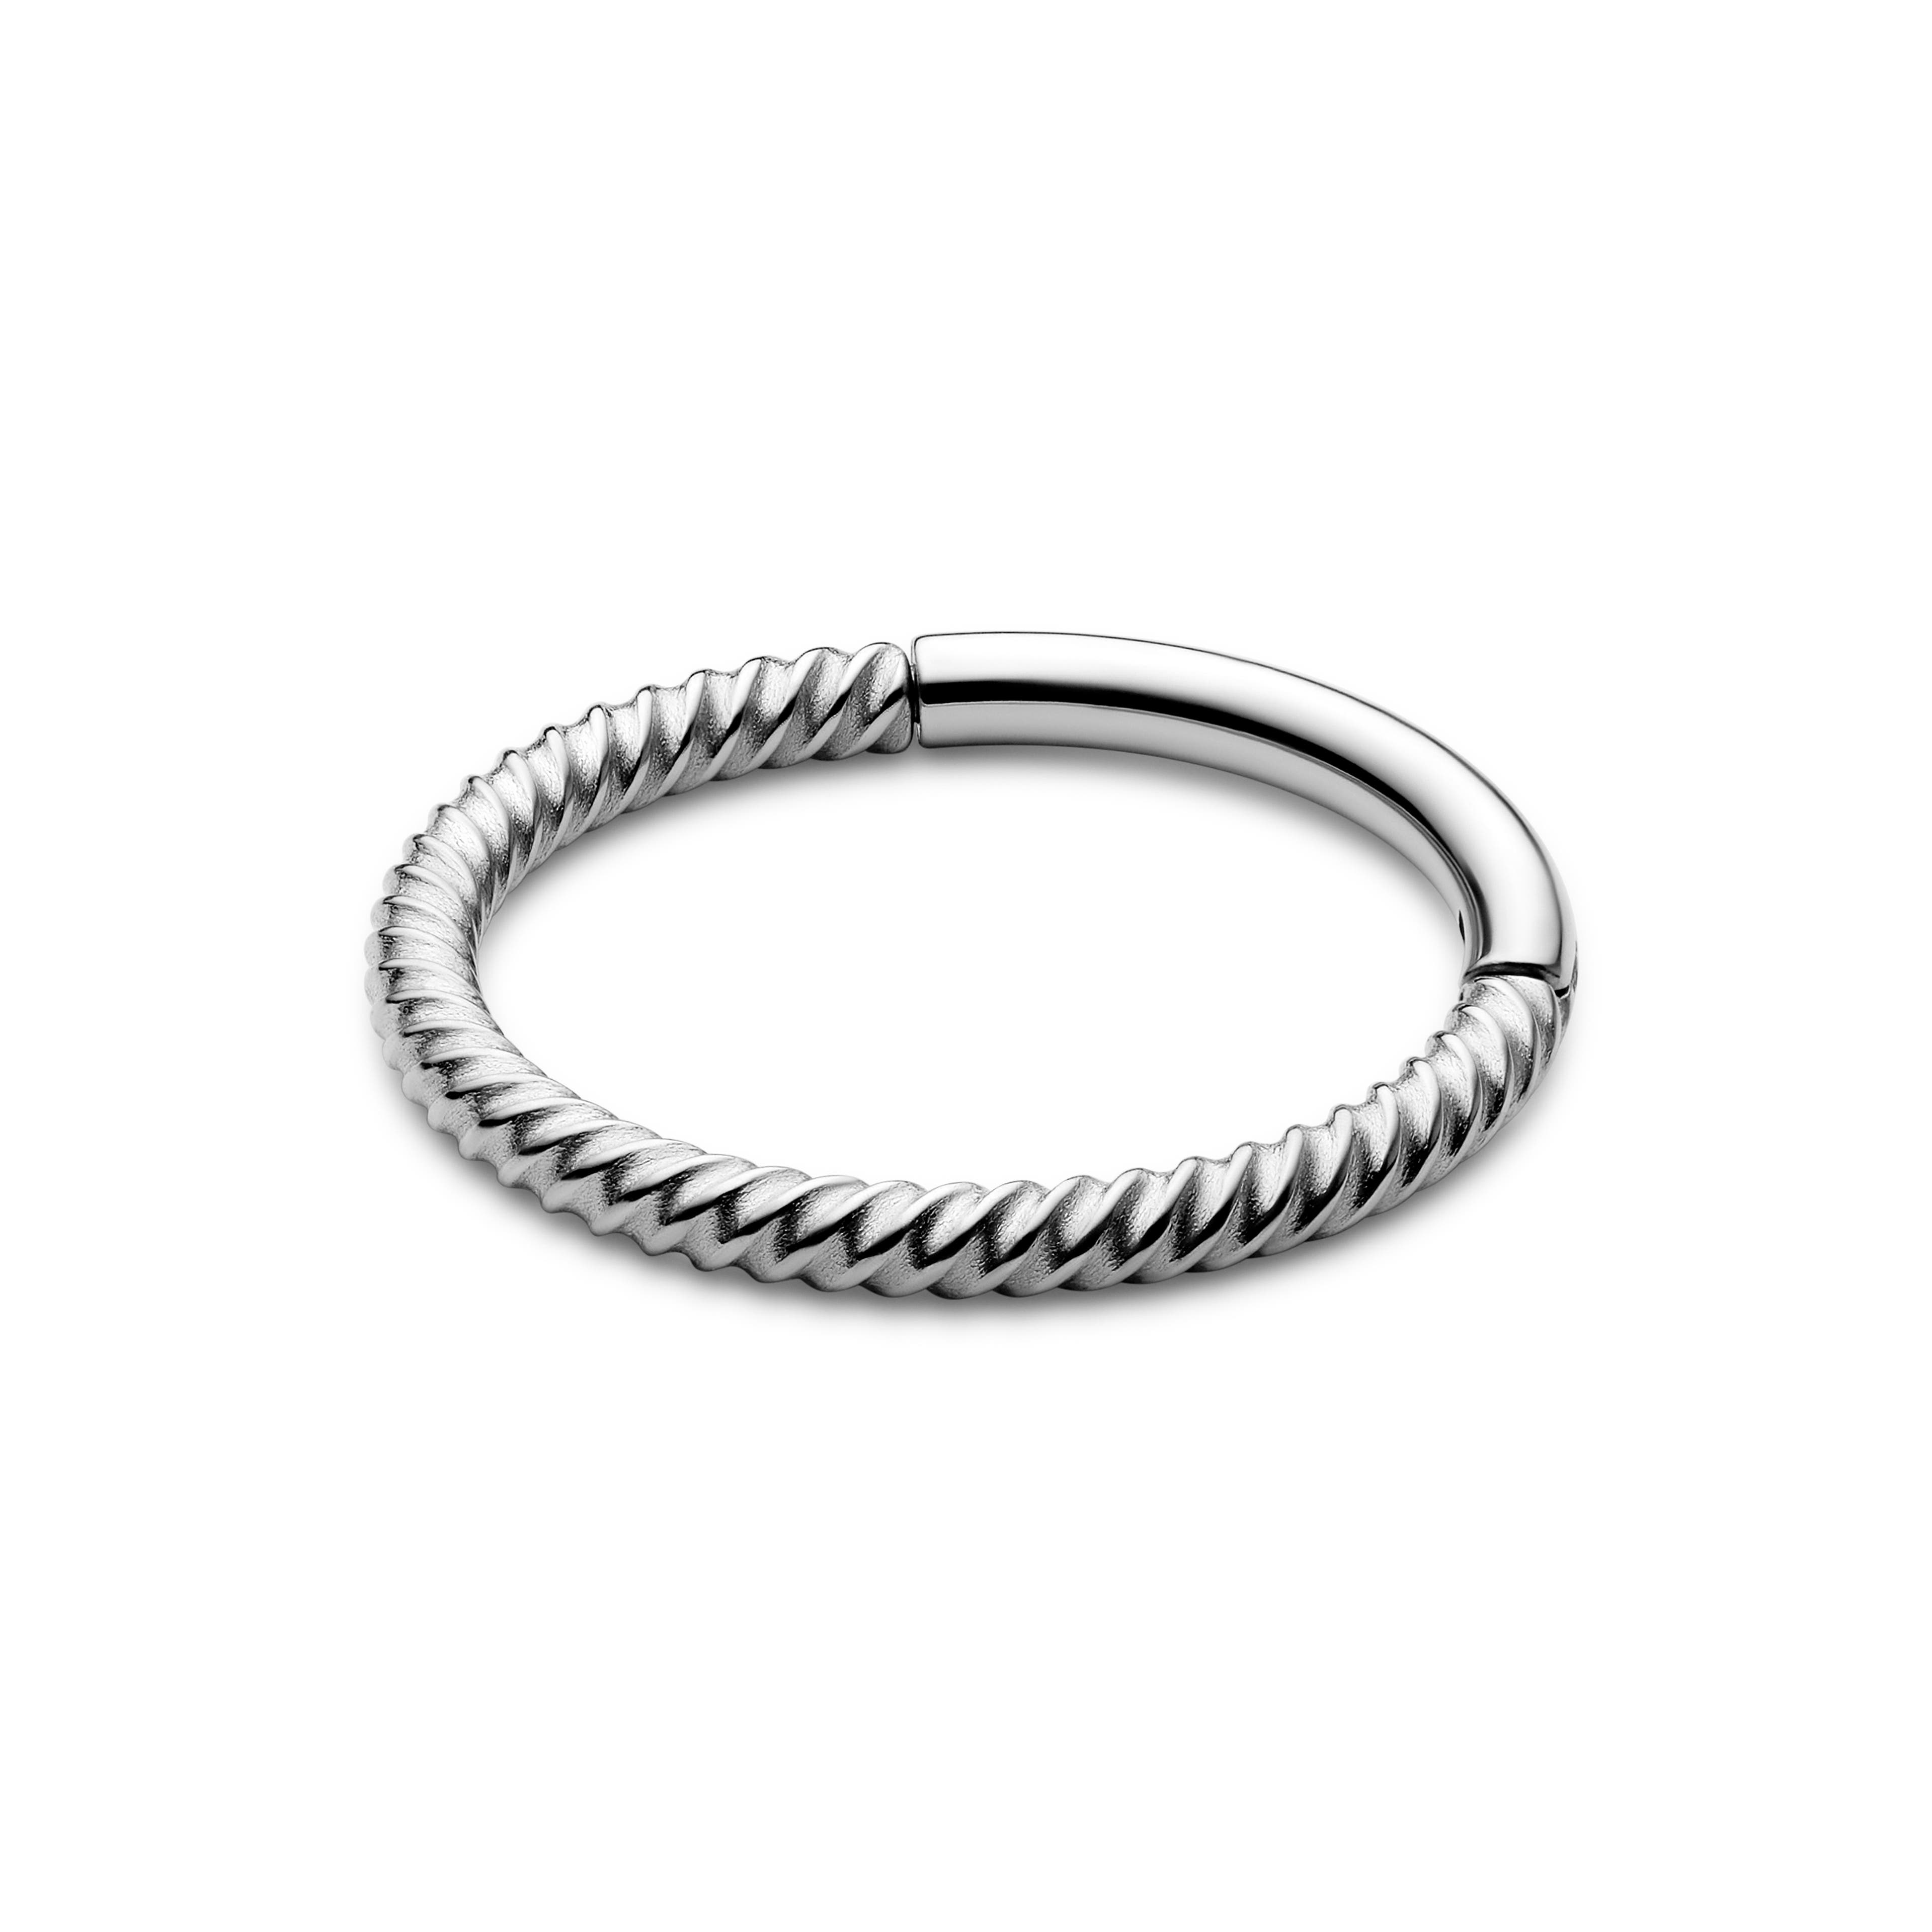 8 mm Silver-Tone Surgical Steel Wire Piercing Ring